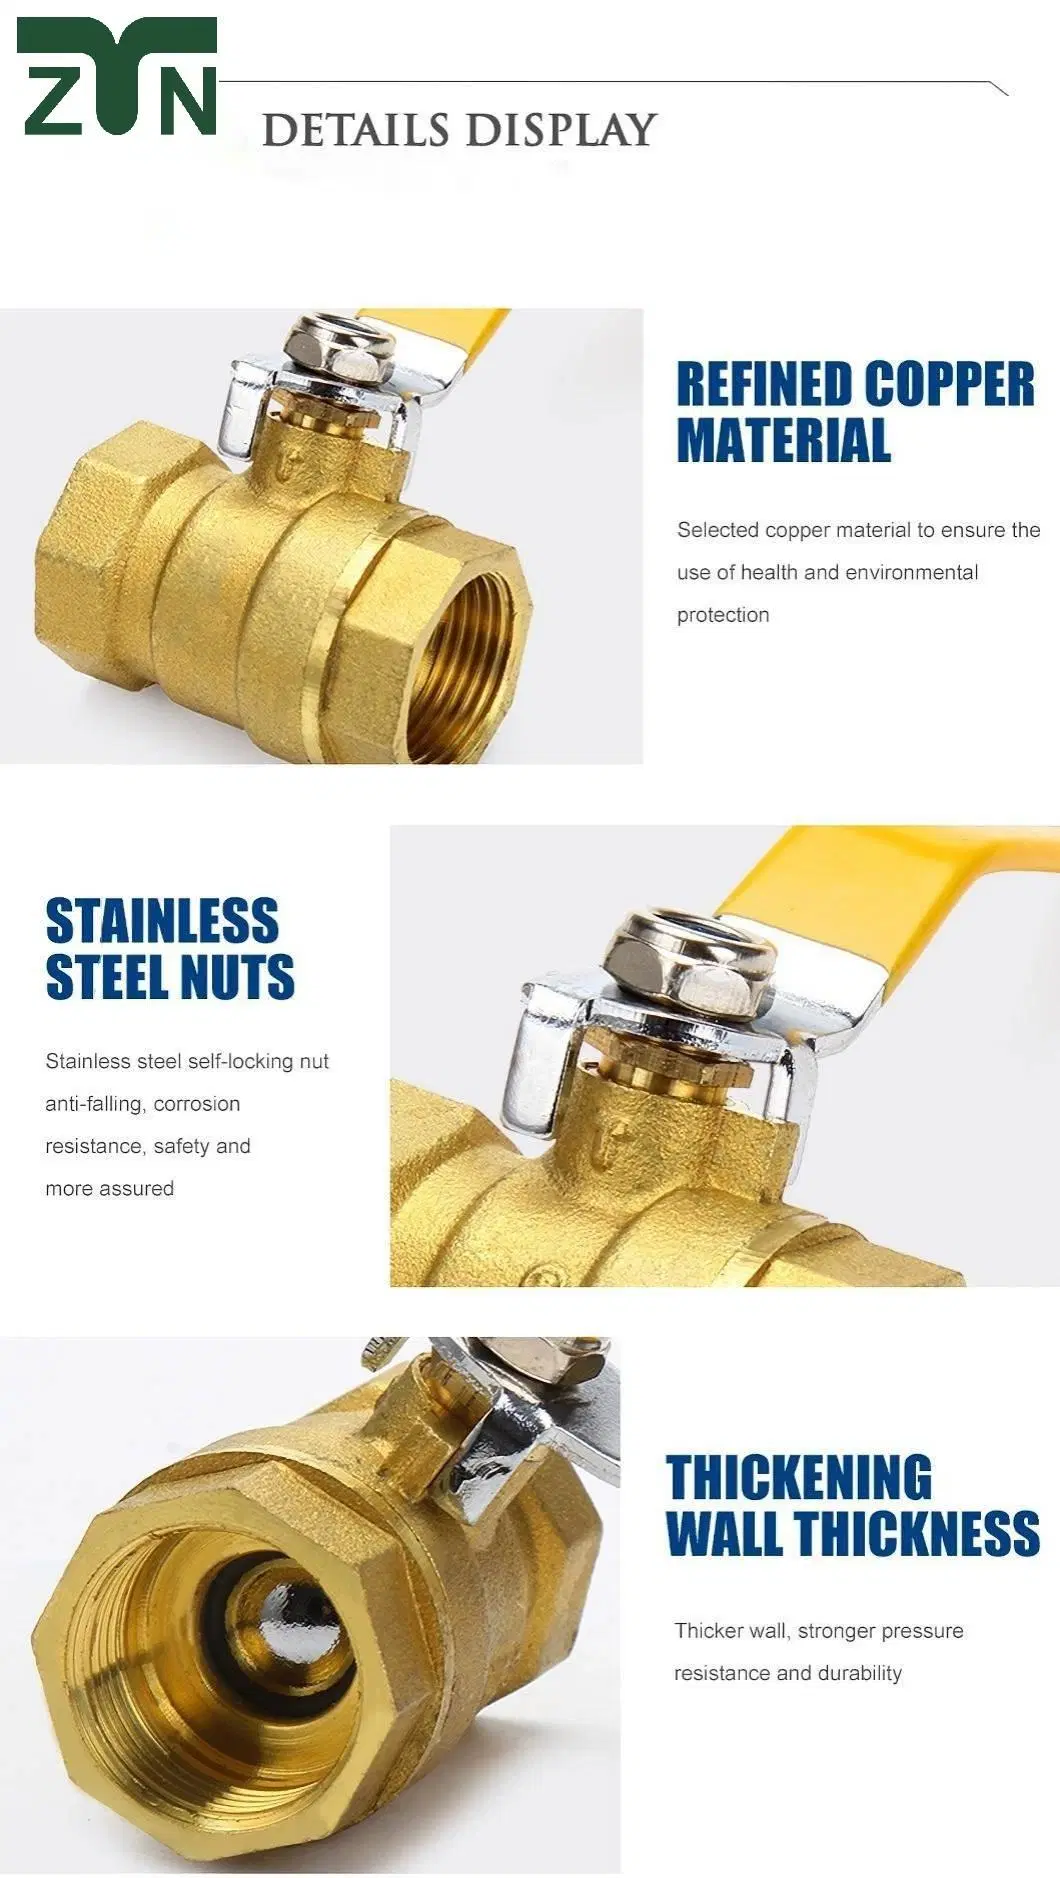 Brass Gas Ball Valve Solenoid Butterfly Control Check Swing Globe Stainless Steel Flanged Y Strainer Bronze Mini Valve